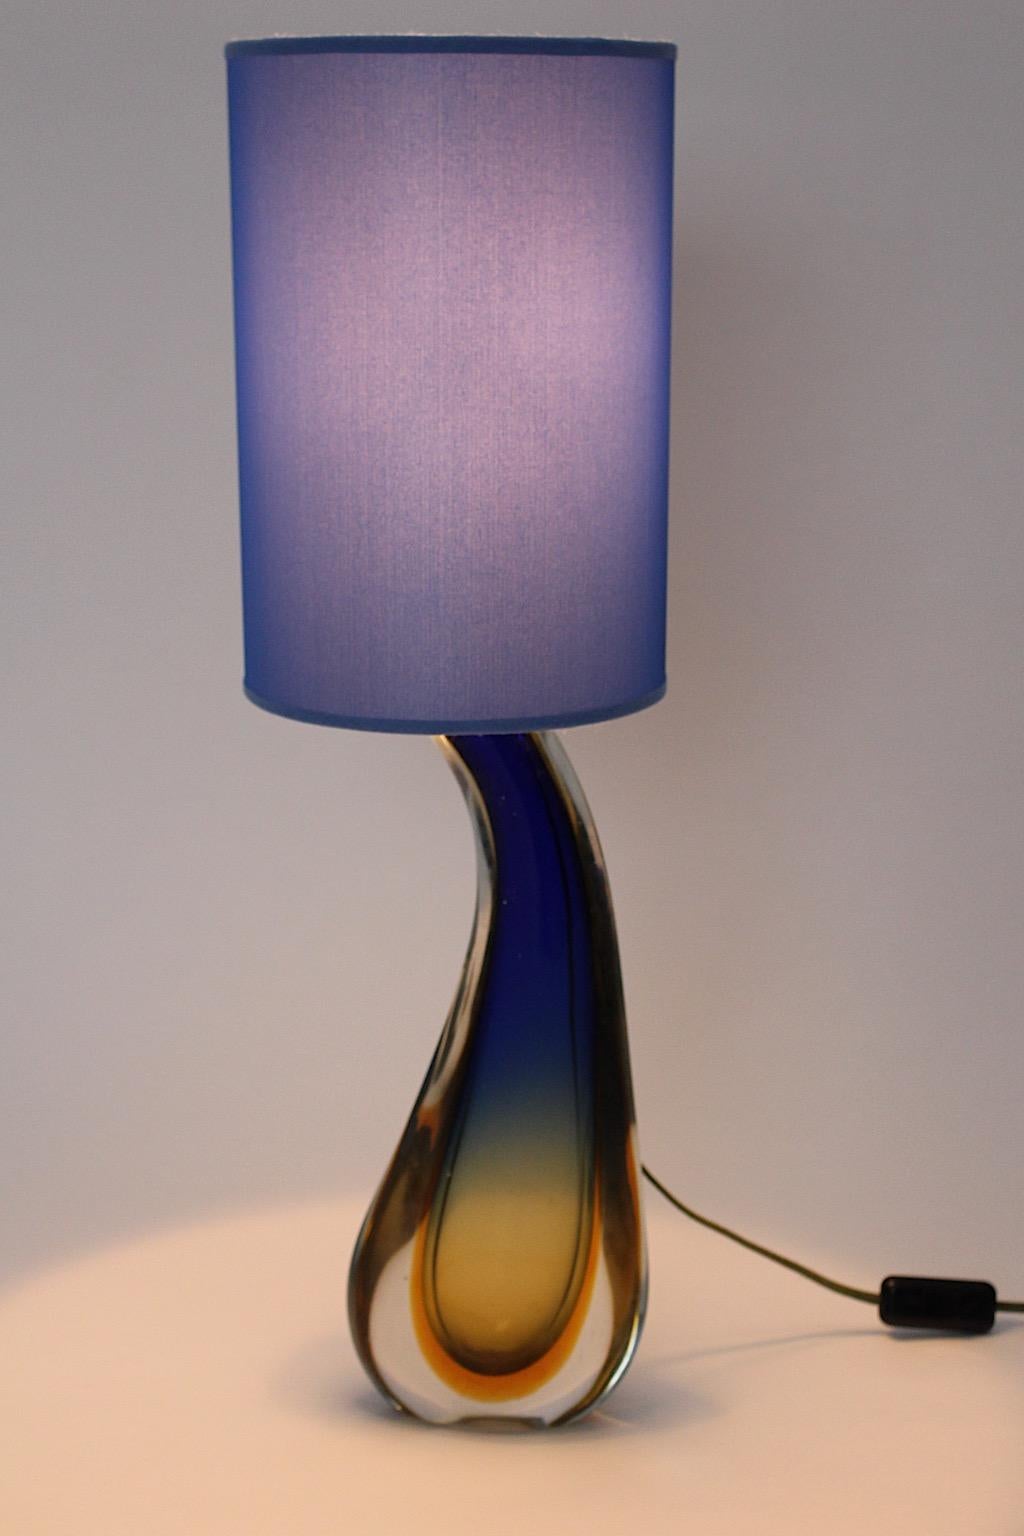 Mid Century Modern vintage table lamp from Murano blown glass in pastel blue and soft orange color by Flavio Poli 1950s Italy. 
A charming and dreamy table lamp in pastel blue and soft orange colors from blown glass Italy 1950s.
This table lamp